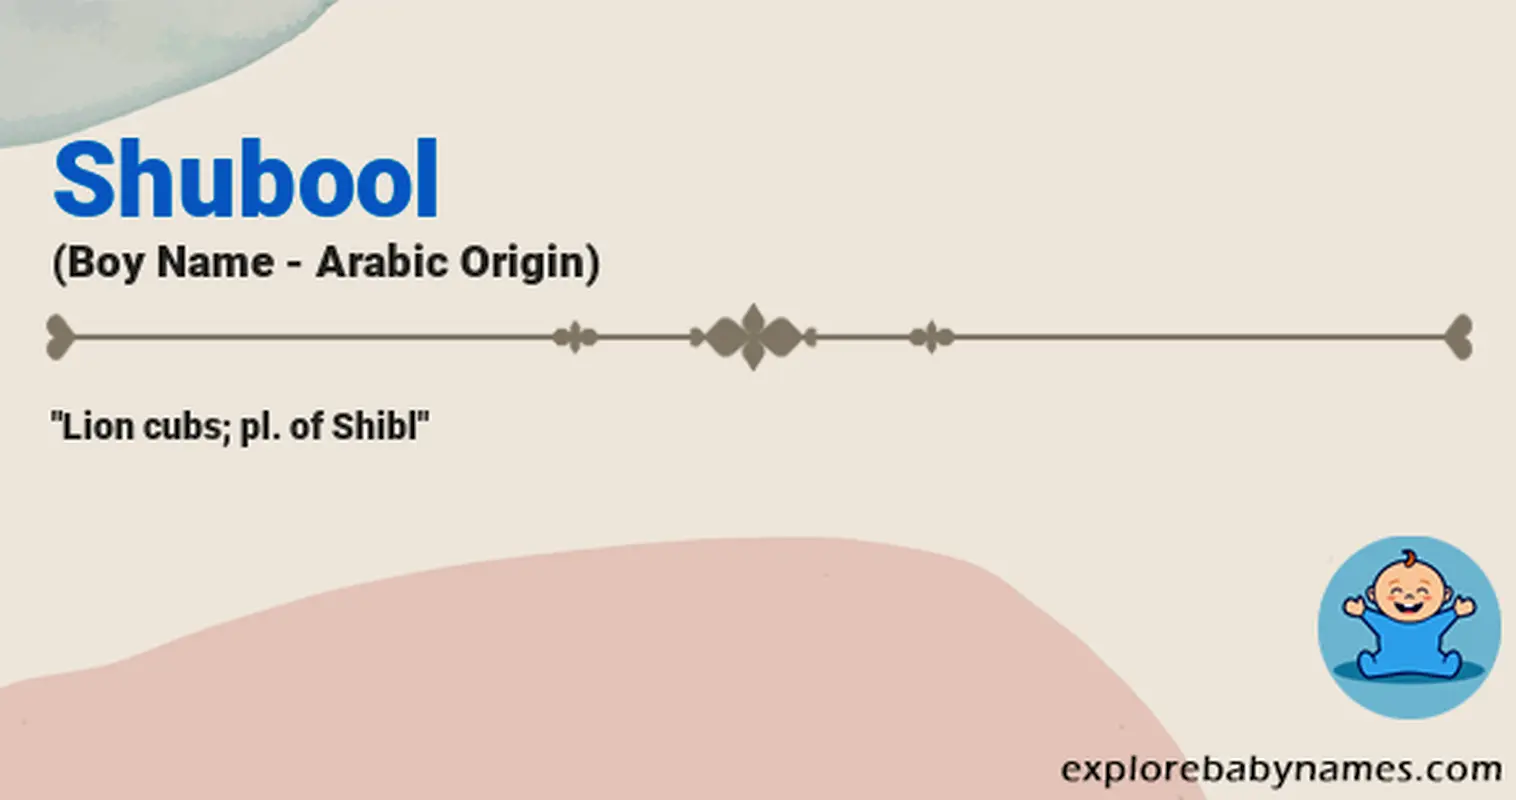 Meaning of Shubool